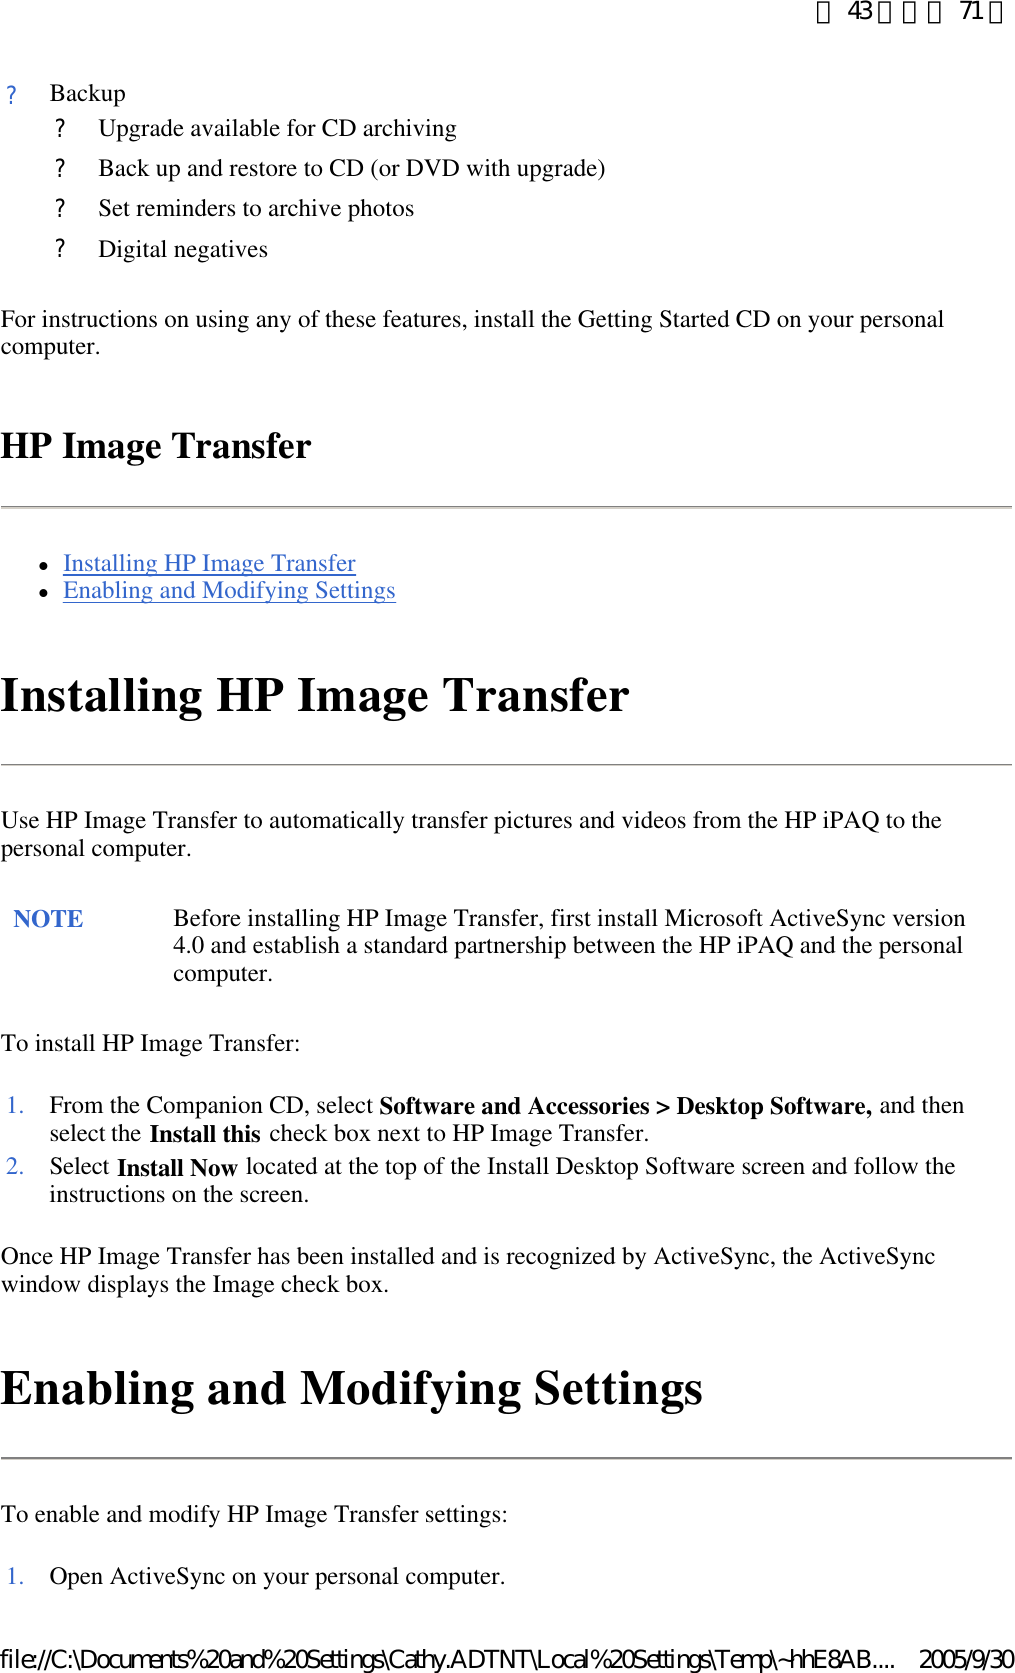 For instructions on using any of these features, install the Getting Started CD on your personal computer. HP Image Transfer lInstalling HP Image Transfer  lEnabling and Modifying Settings  Installing HP Image Transfer Use HP Image Transfer to automatically transfer pictures and videos from the HP iPAQ to the personal computer. To install HP Image Transfer: Once HP Image Transfer has been installed and is recognized by ActiveSync, the ActiveSync window displays the Image check box.  Enabling and Modifying Settings To enable and modify HP Image Transfer settings: ?Backup ?Upgrade available for CD archiving?Back up and restore to CD (or DVD with upgrade)?Set reminders to archive photos?Digital negativesNOTE Before installing HP Image Transfer, first install Microsoft ActiveSync version 4.0 and establish a standard partnership between the HP iPAQ and the personal computer.  1. From the Companion CD, select Software and Accessories &gt; Desktop Software, and then select the Install this check box next to HP Image Transfer. 2. Select Install Now located at the top of the Install Desktop Software screen and follow the instructions on the screen. 1. Open ActiveSync on your personal computer.第 43 頁，共 71 頁2005/9/30file://C:\Documents%20and%20Settings\Cathy.ADTNT\Local%20Settings\Temp\~hhE8AB....